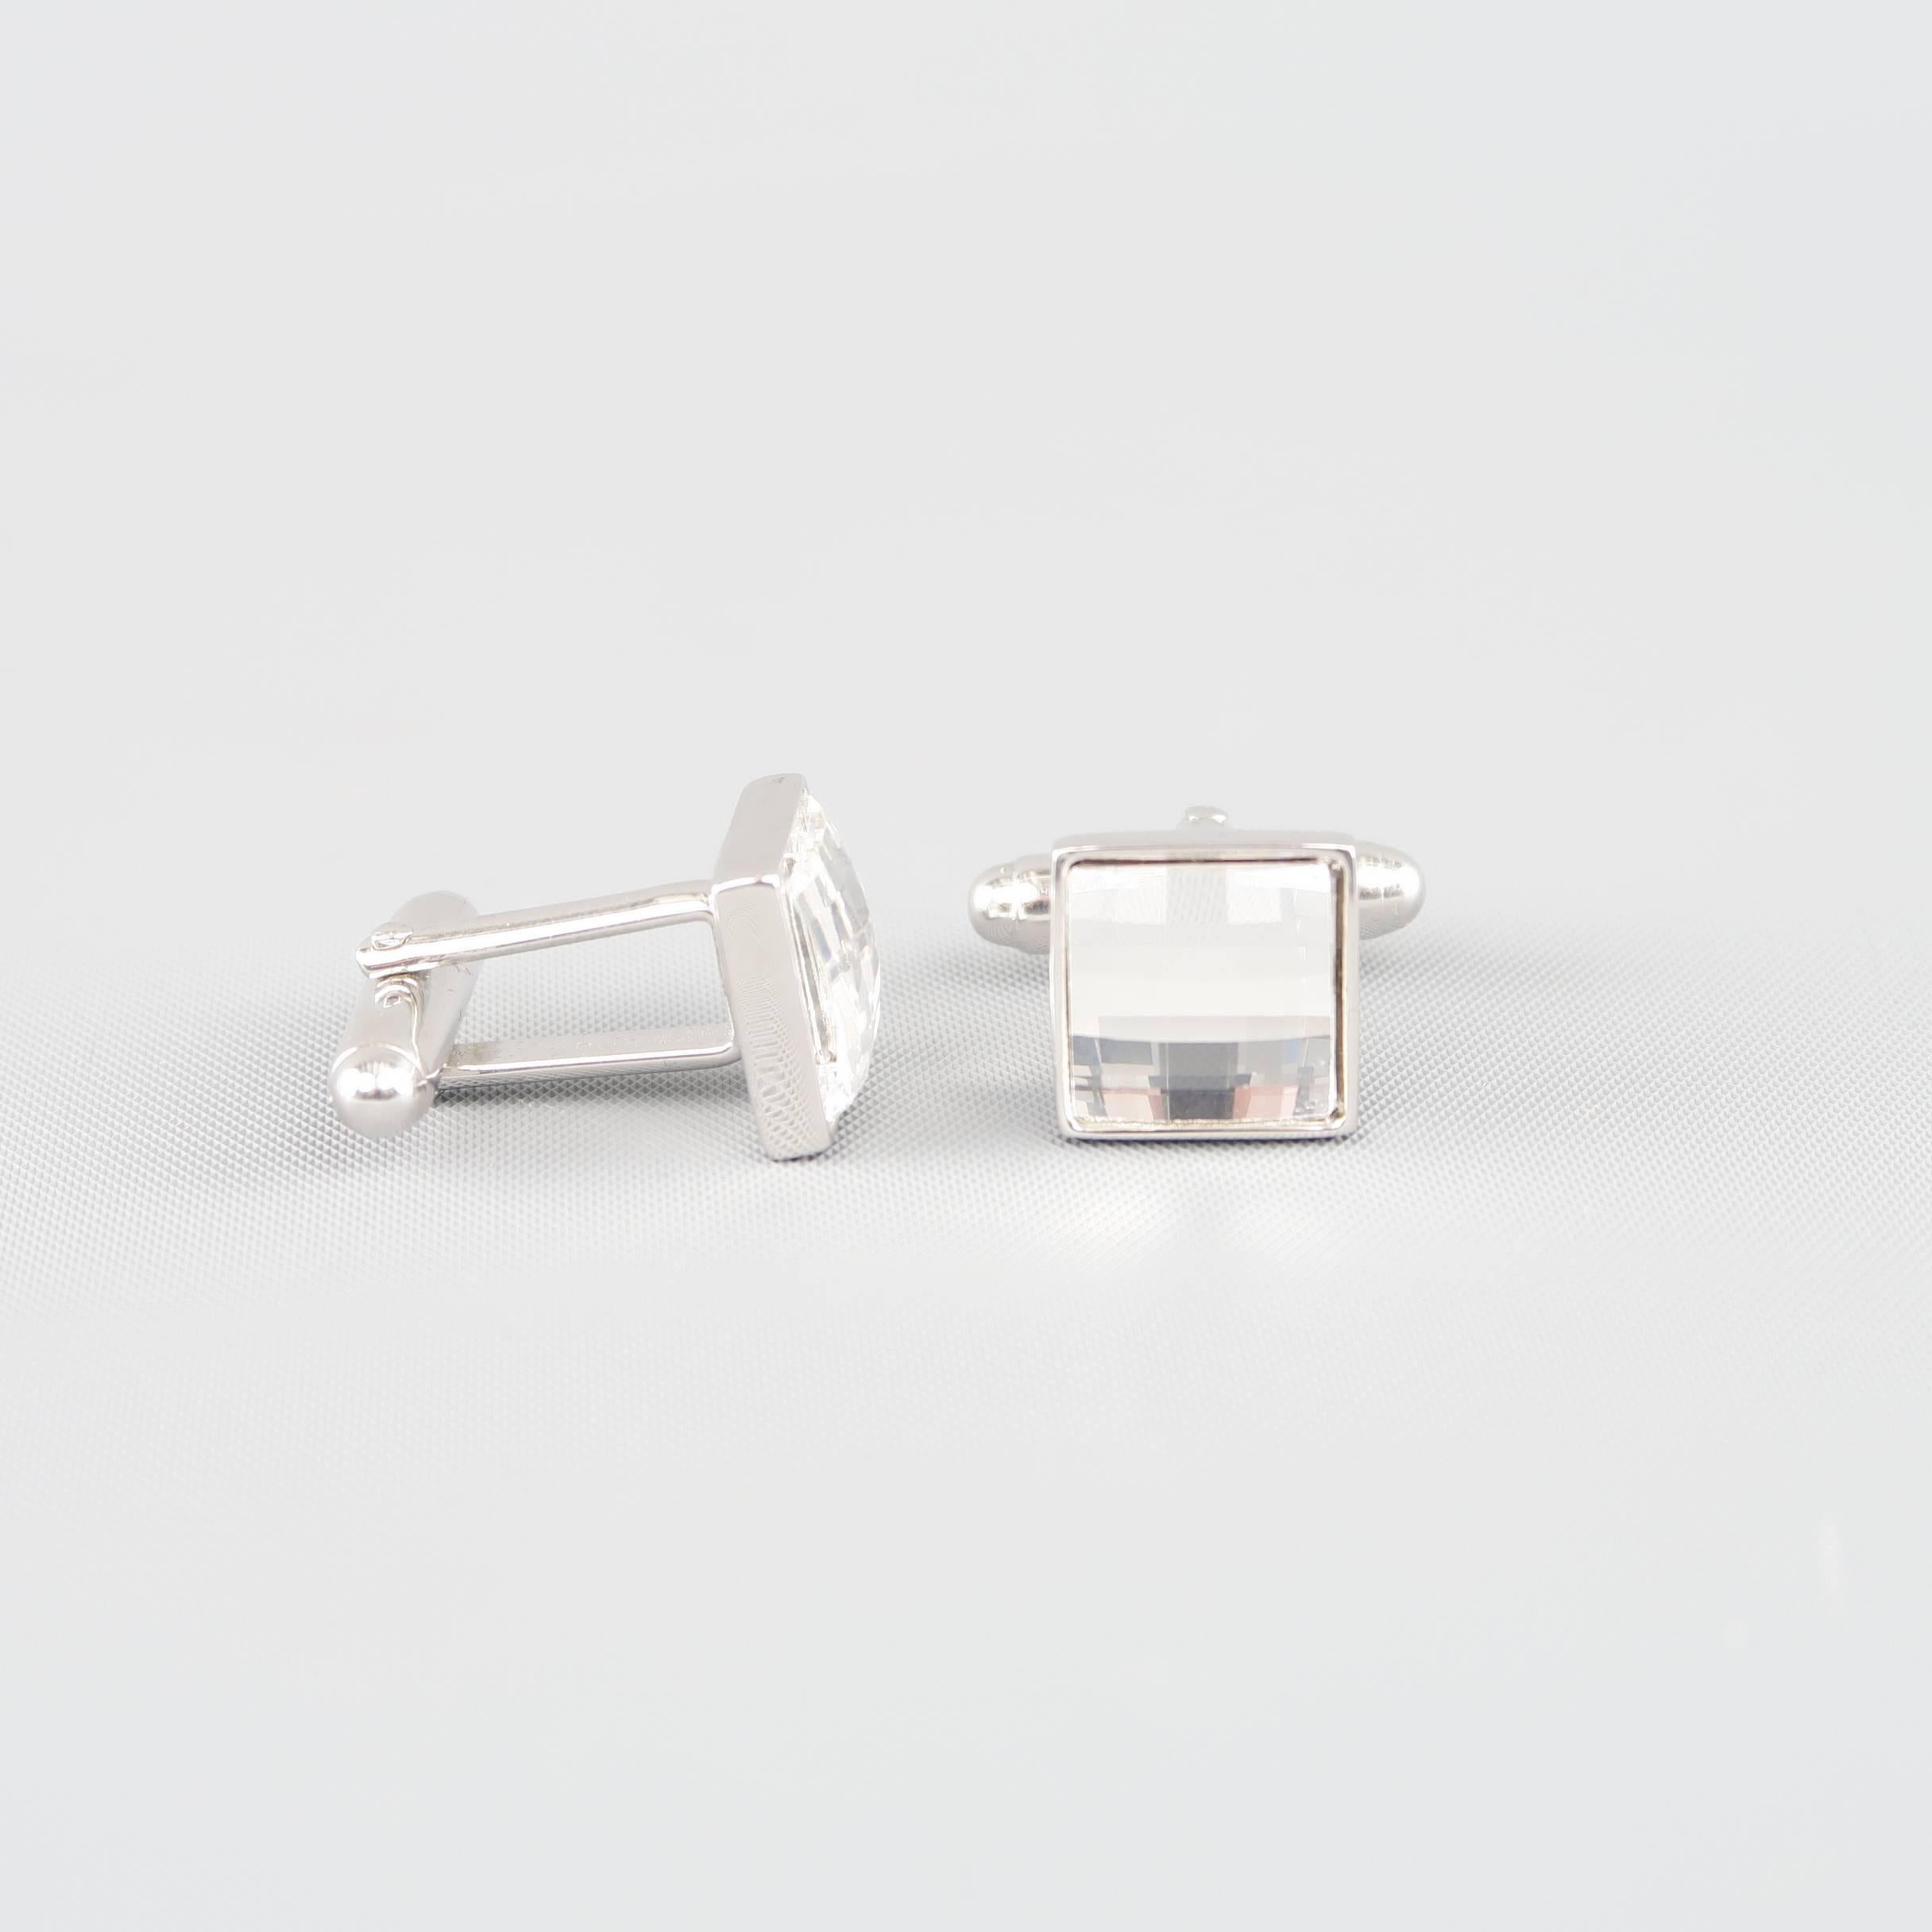 SWAROVSKI cuff links come in silver tone metal with square crystal studs.
 
New with Box.


SKU: 85386